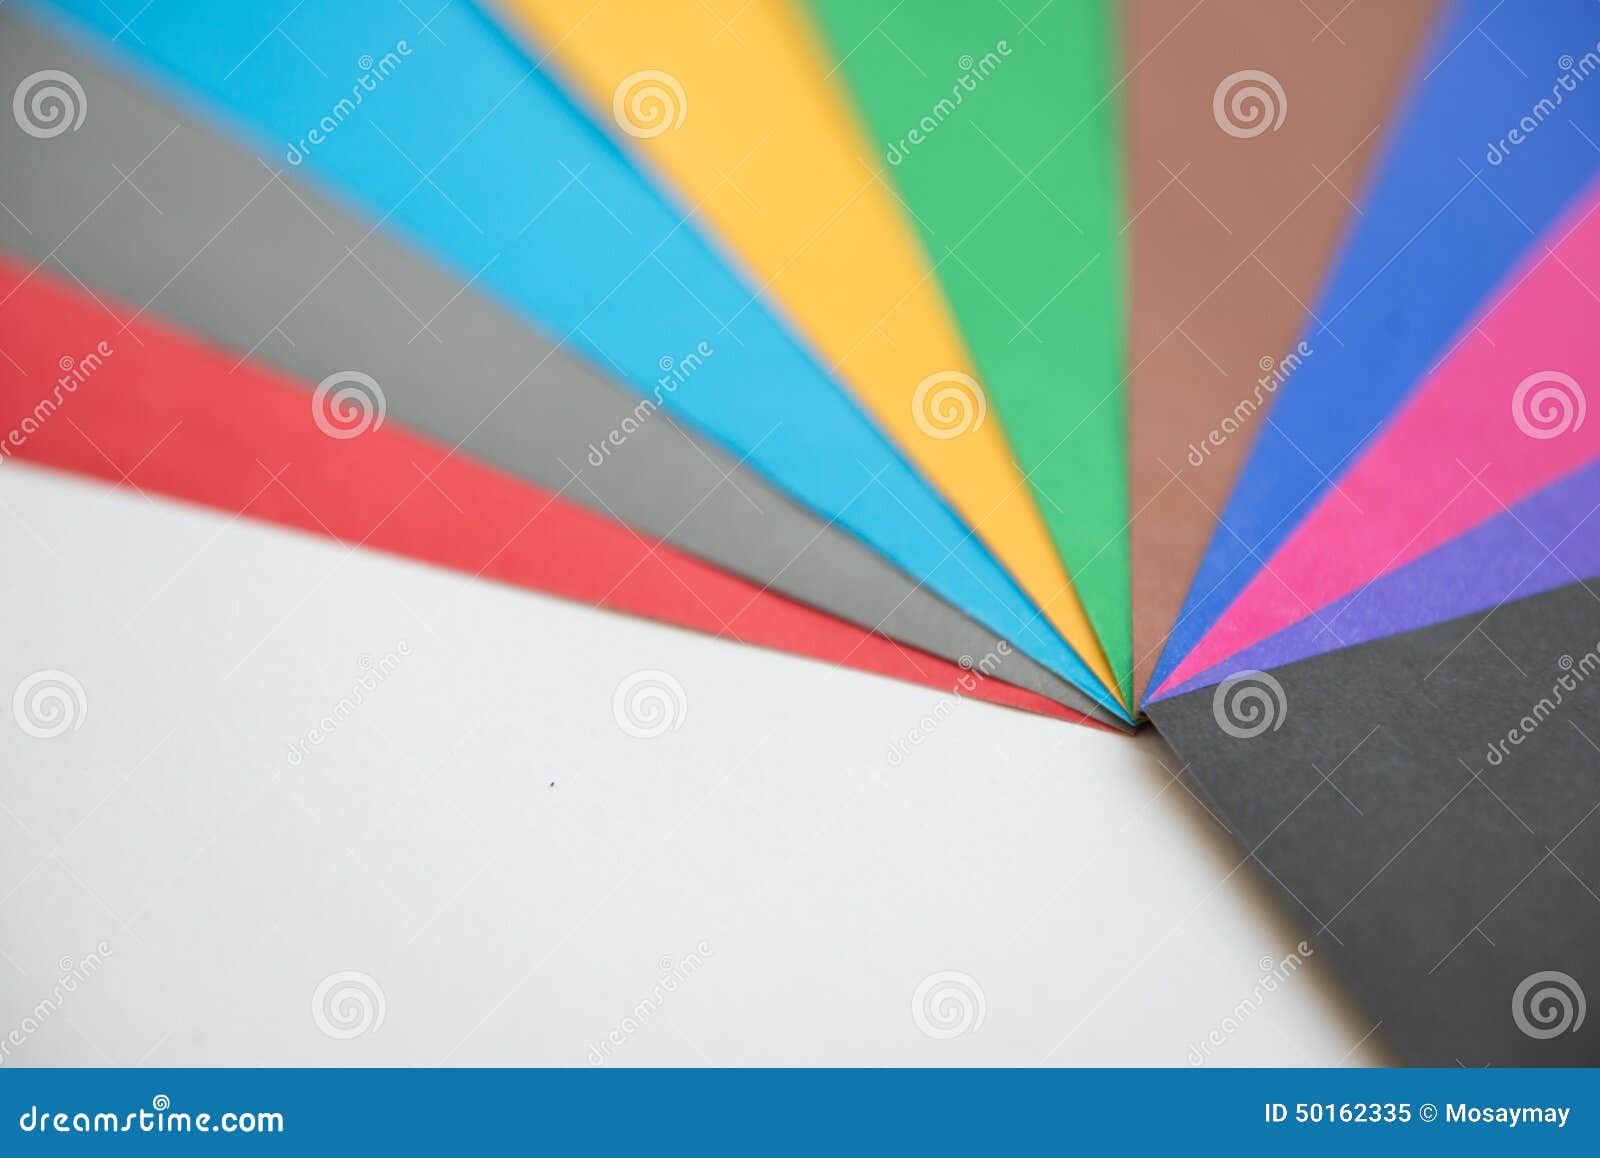 Lot of Color Paper for Crafts Idea Stock Image - Image of white